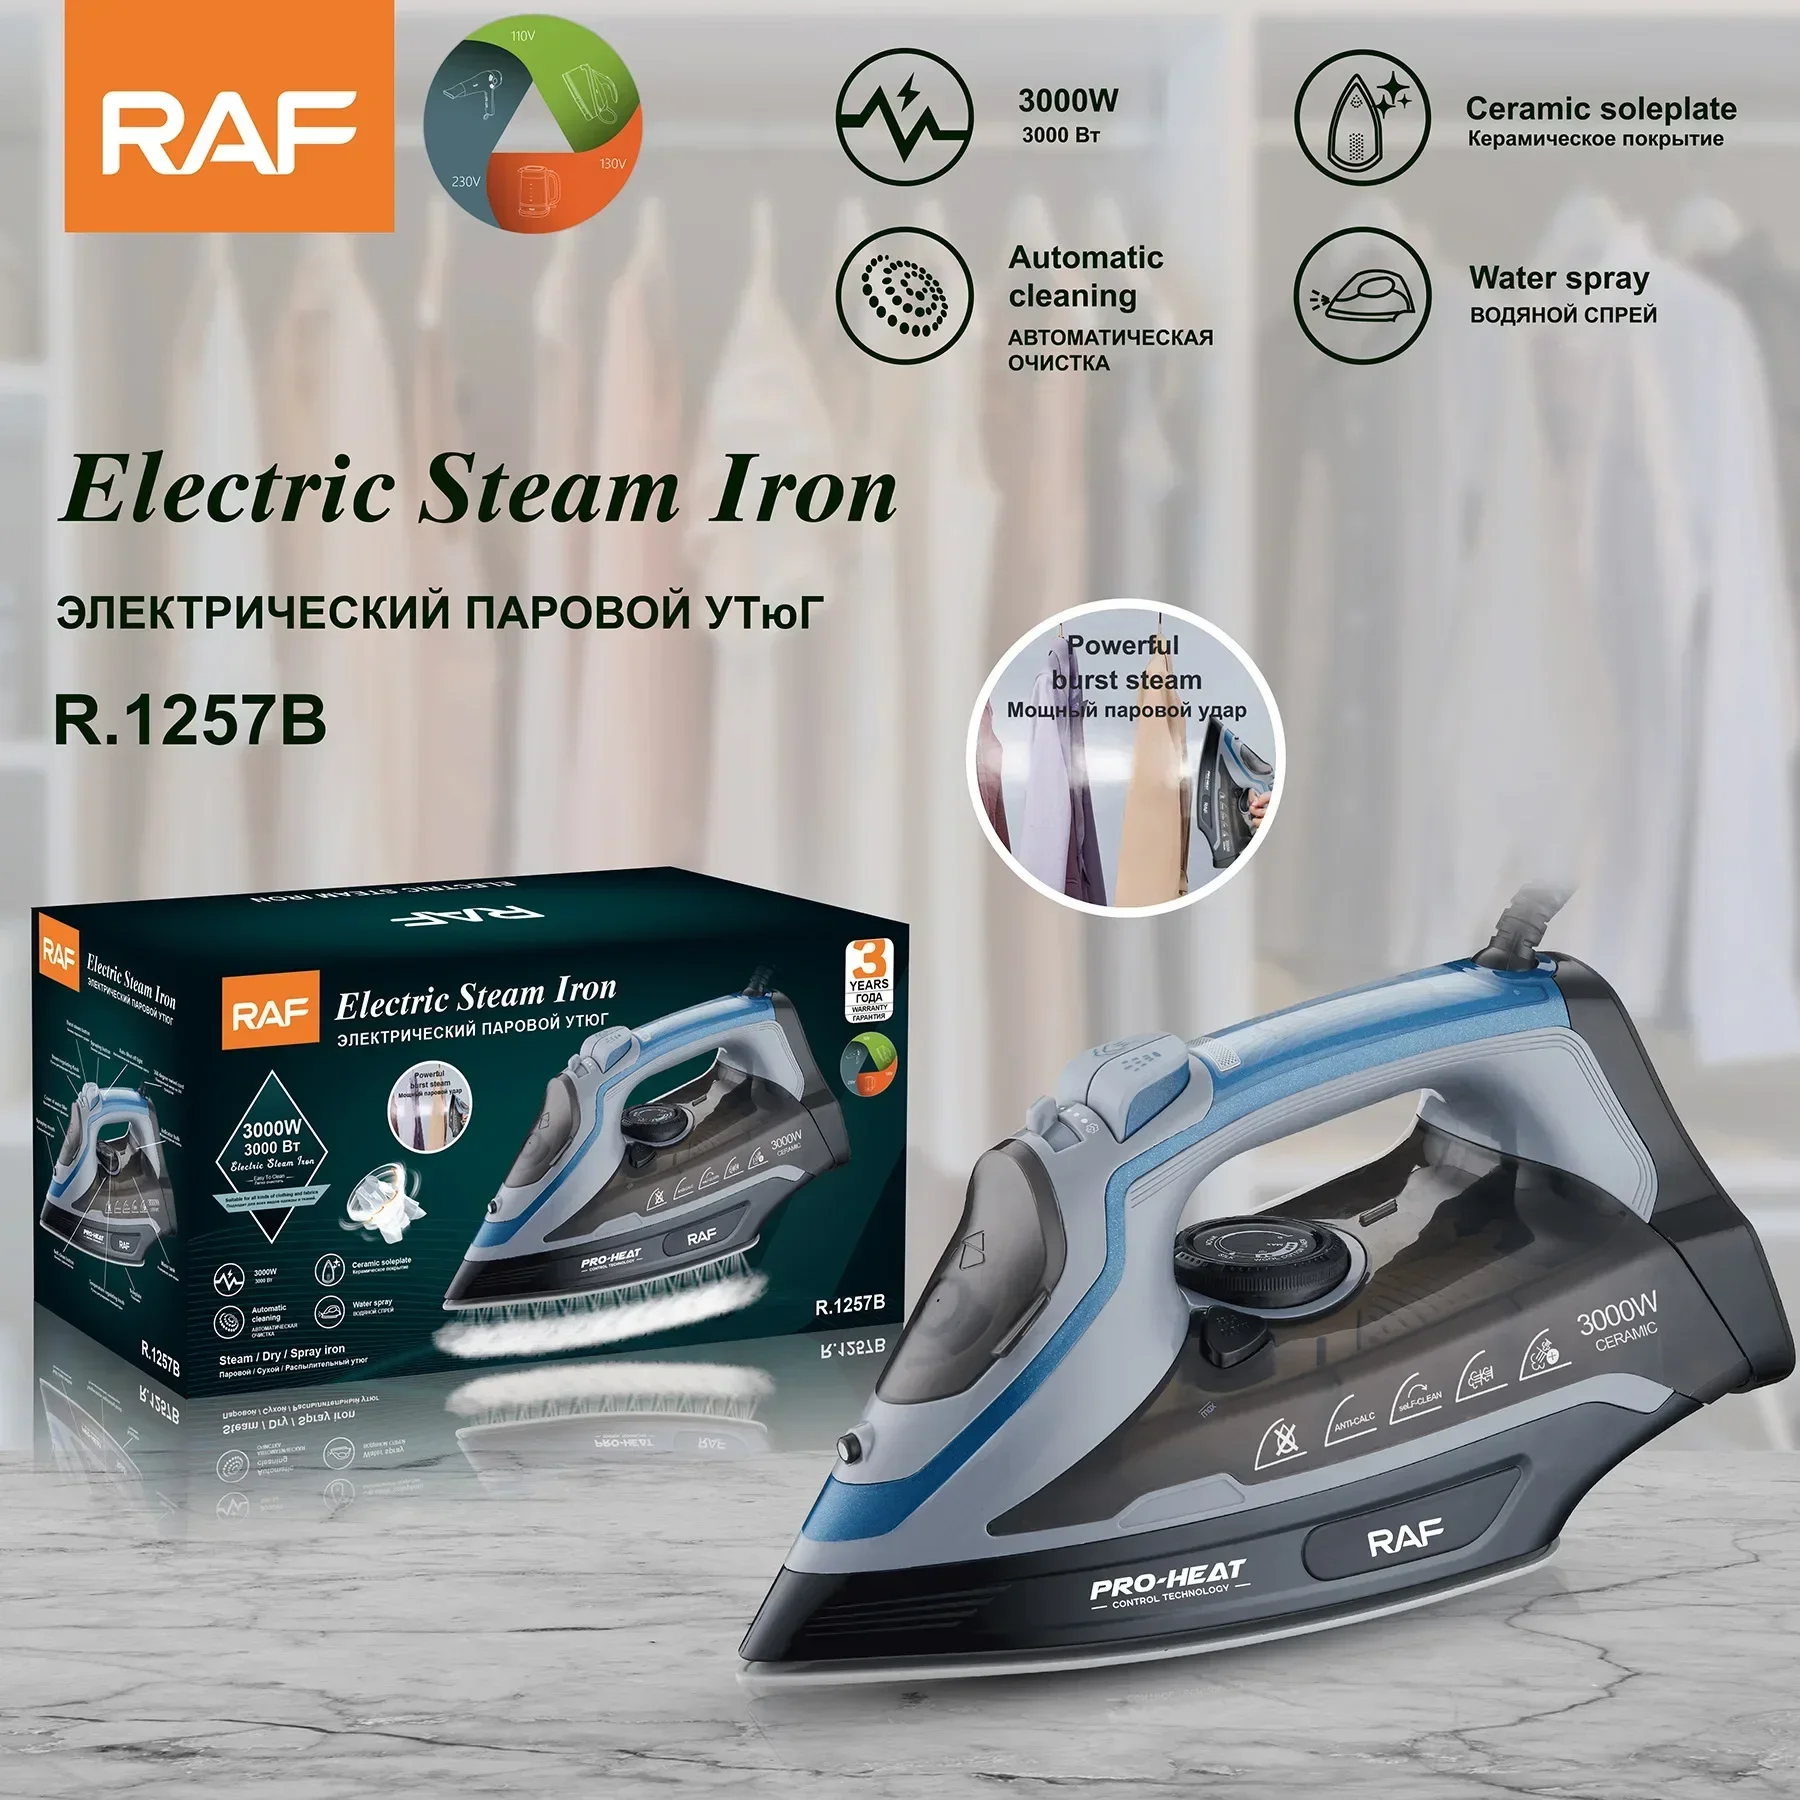 

Professional Grade 3000W Steam Iron for Clothes with Rapid Even Heat Scratch Resistant Stainless Steel Ceramics Soleplate